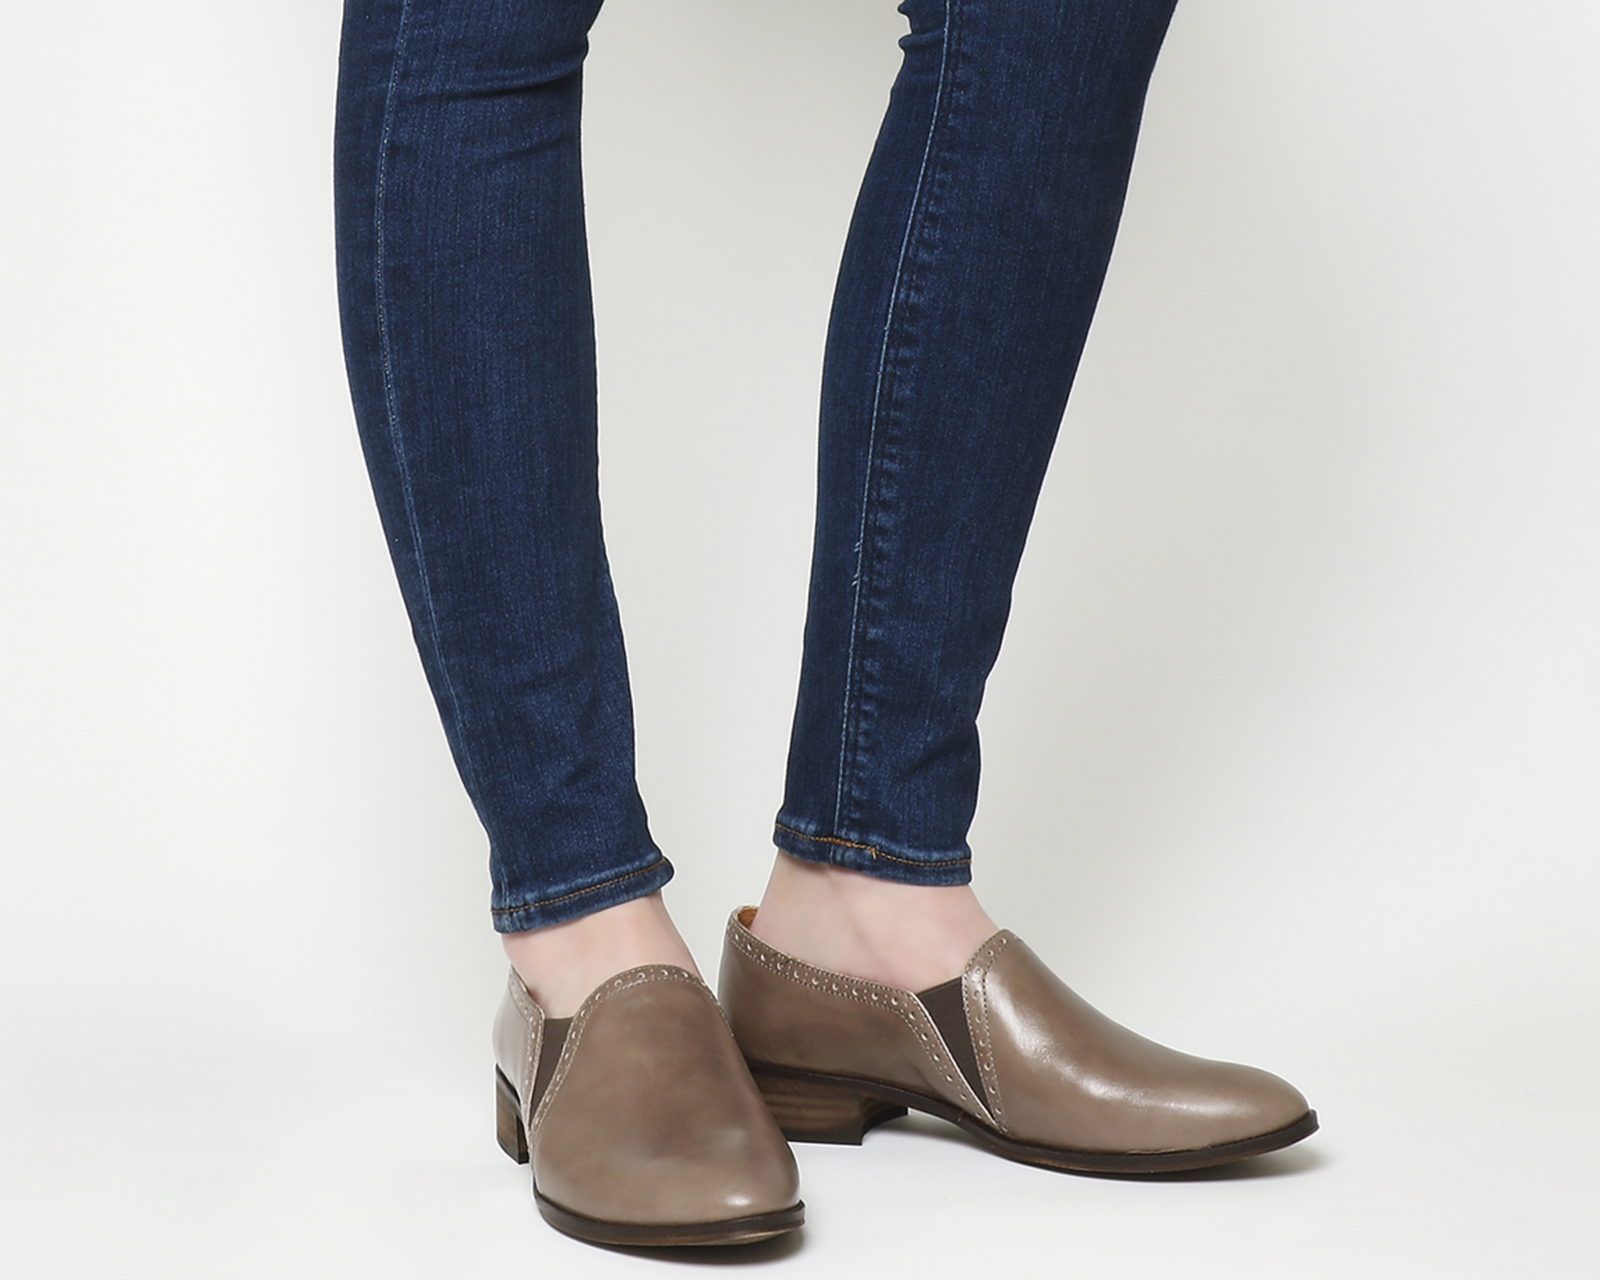 OFFICEPace Western ShoesTaupe Leather